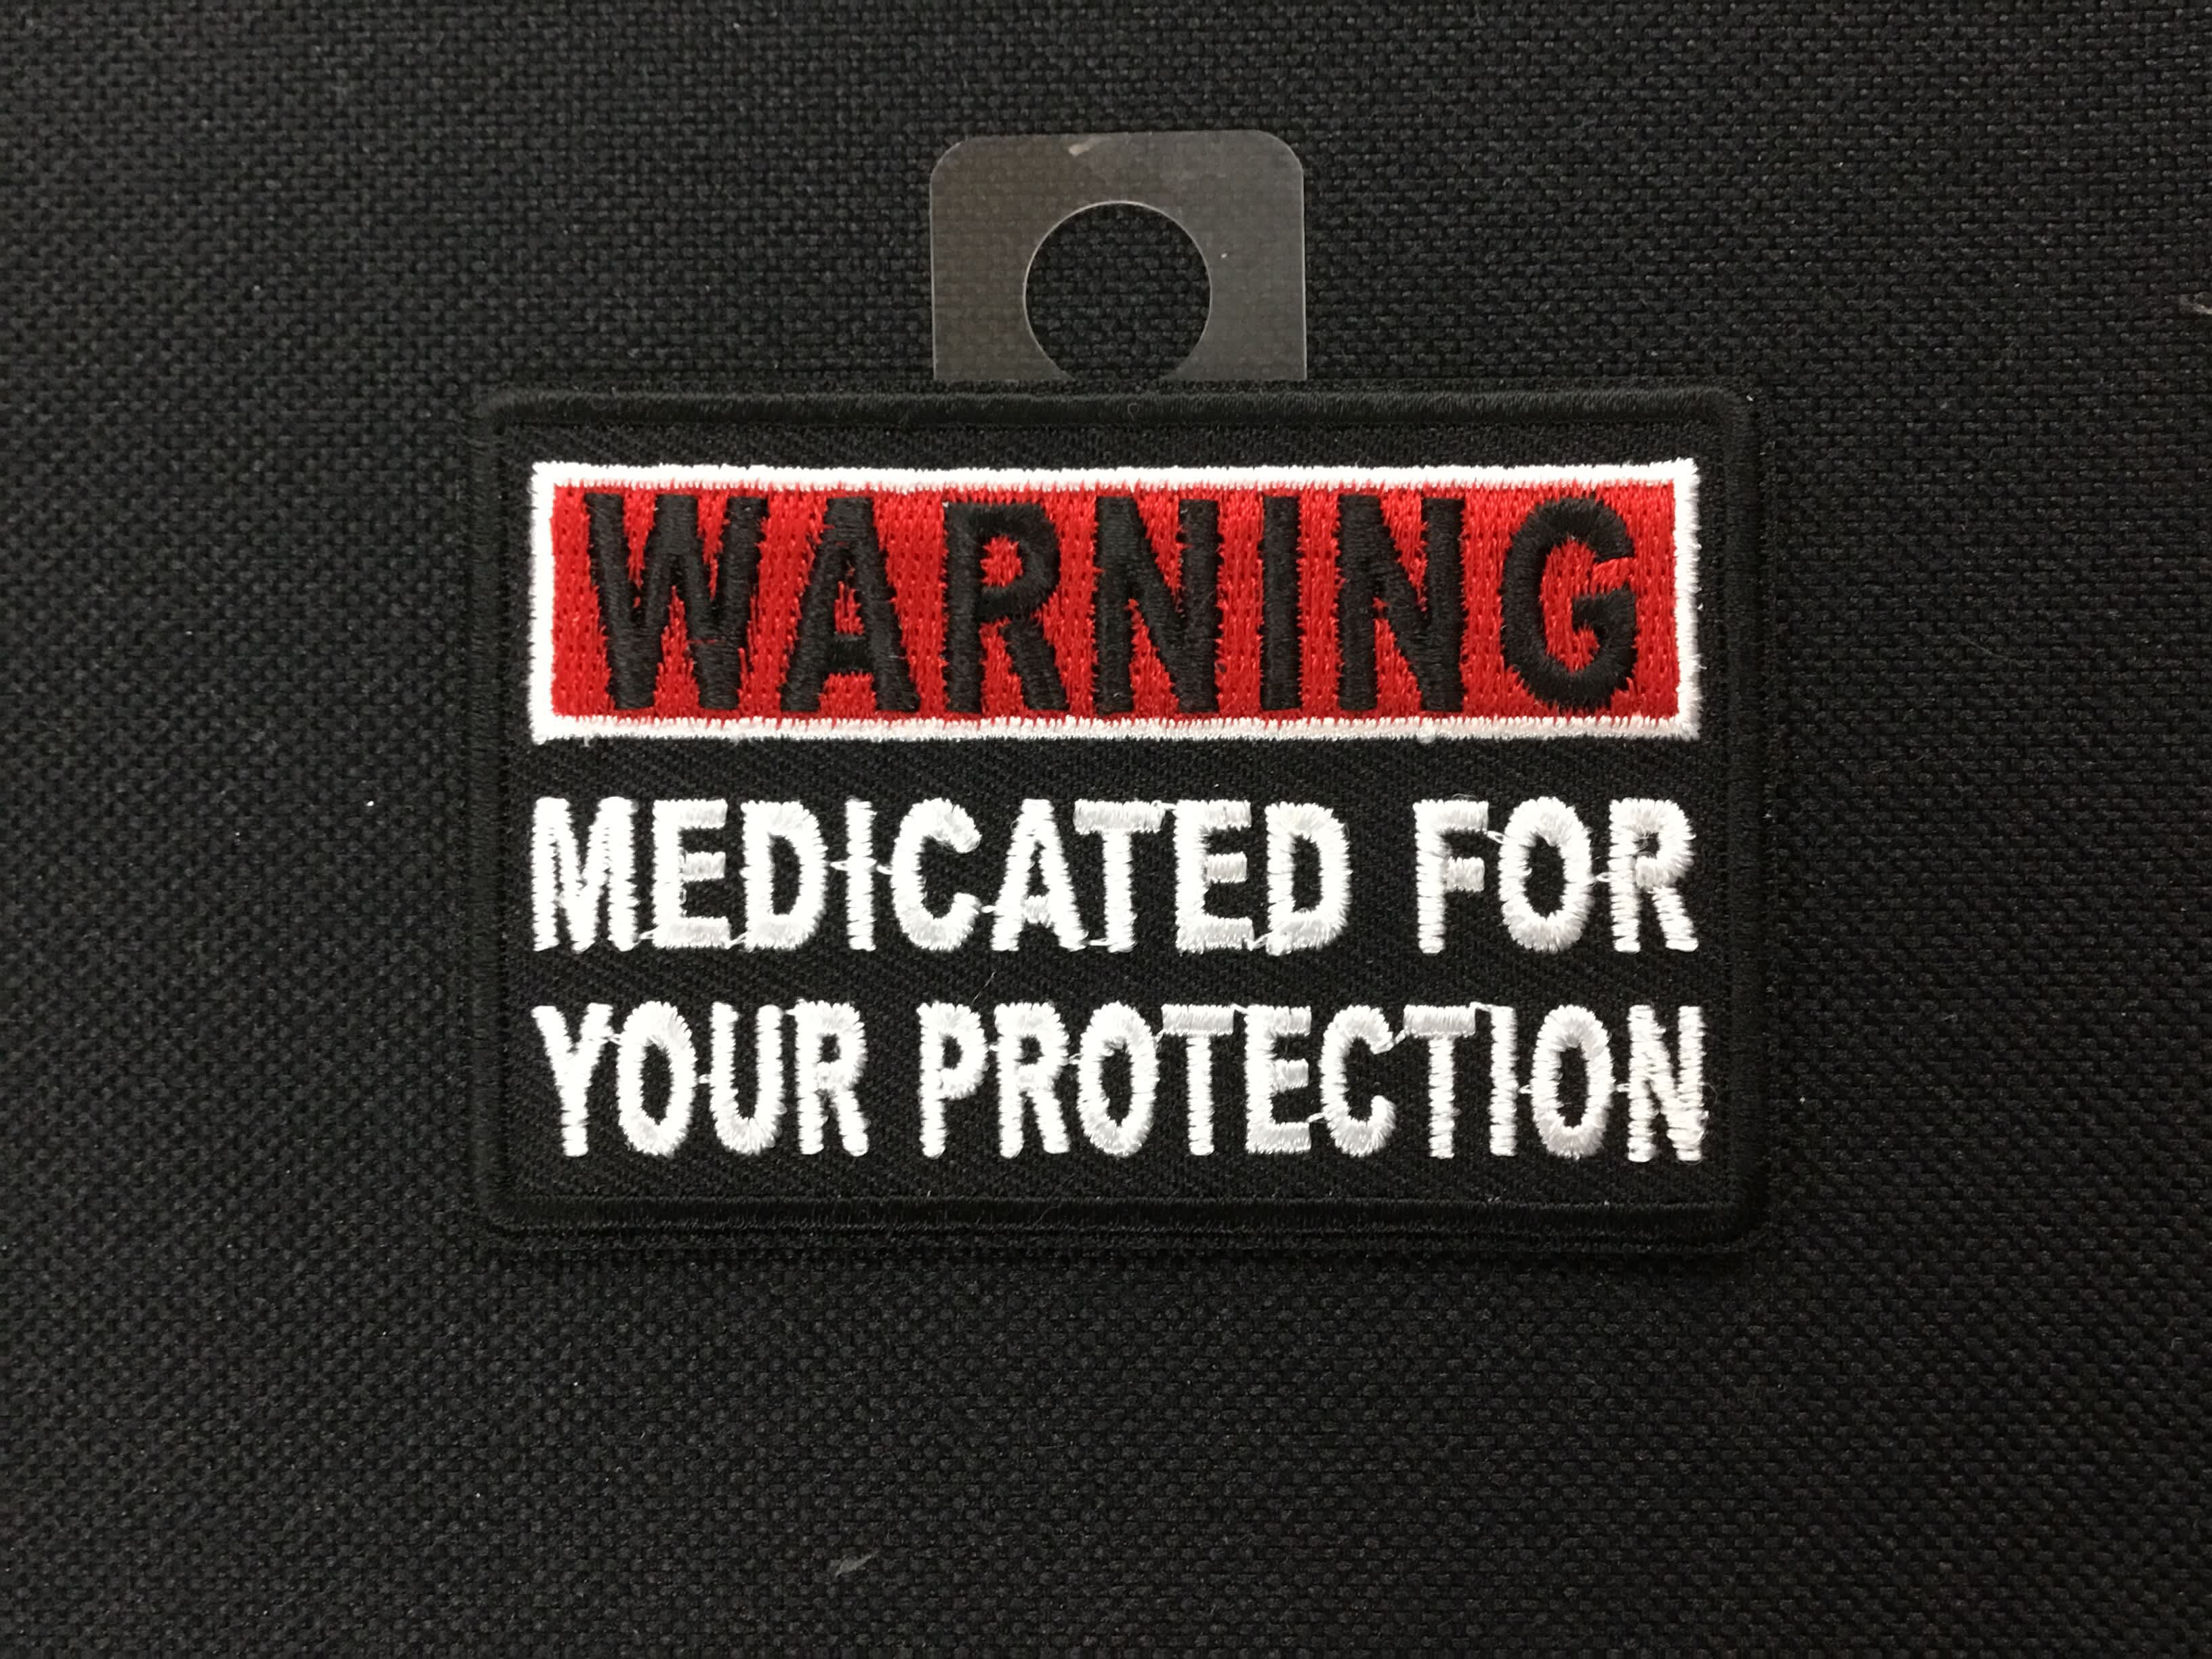 WARNING: Medicated For Your Protection 3" X 1.5" patch Biker B 4584 